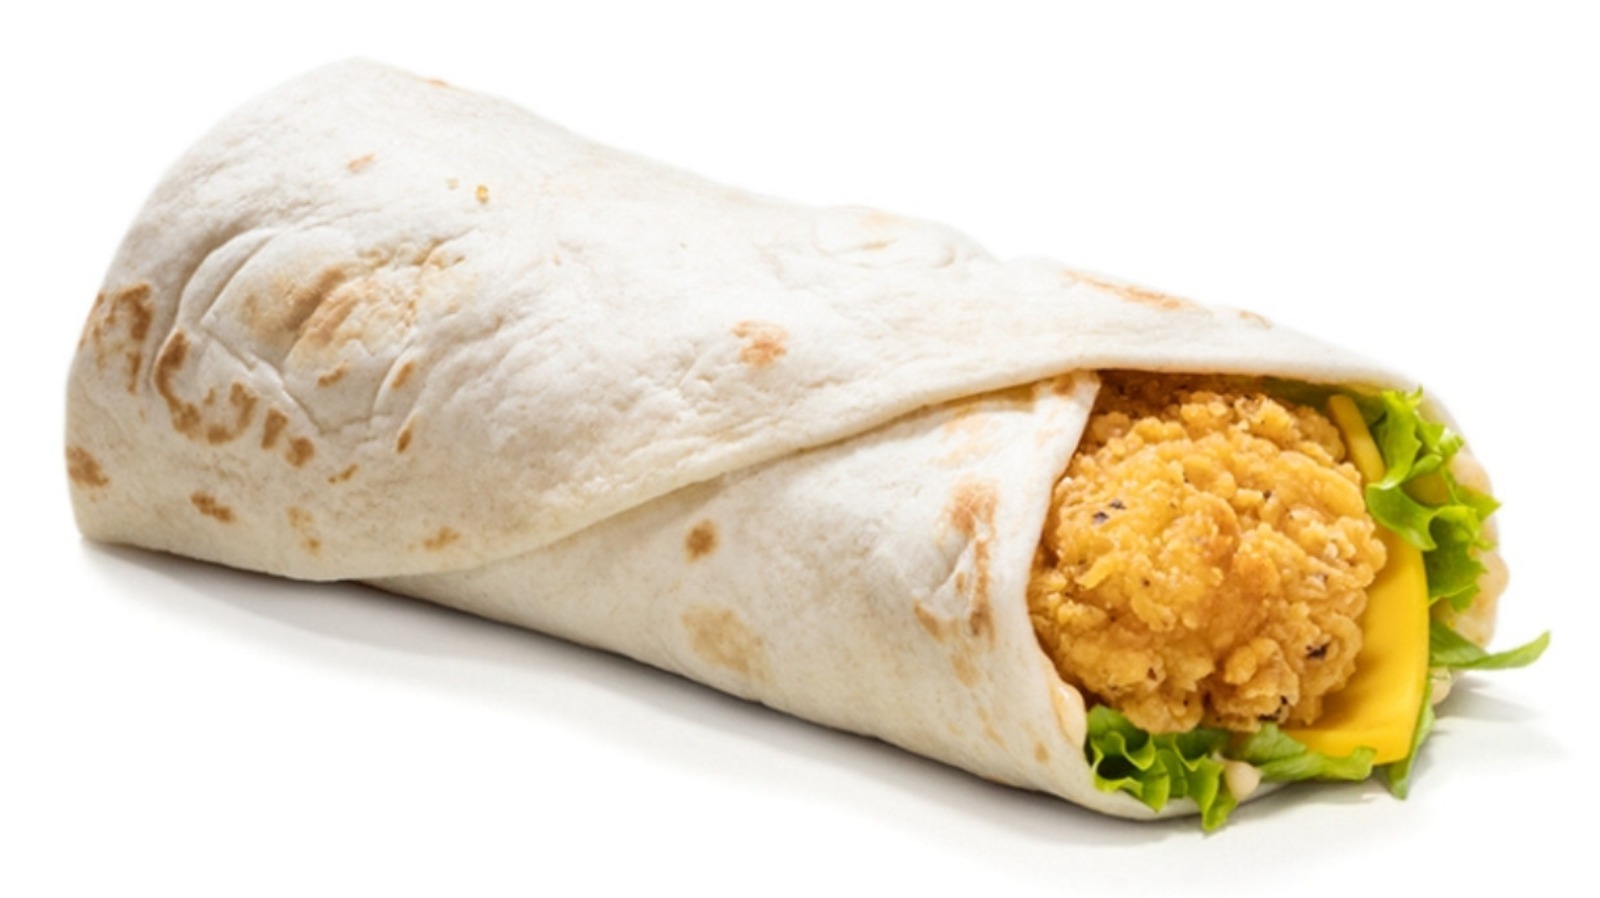 Will McDonald's Snack Wraps Actually Return To The Menu?